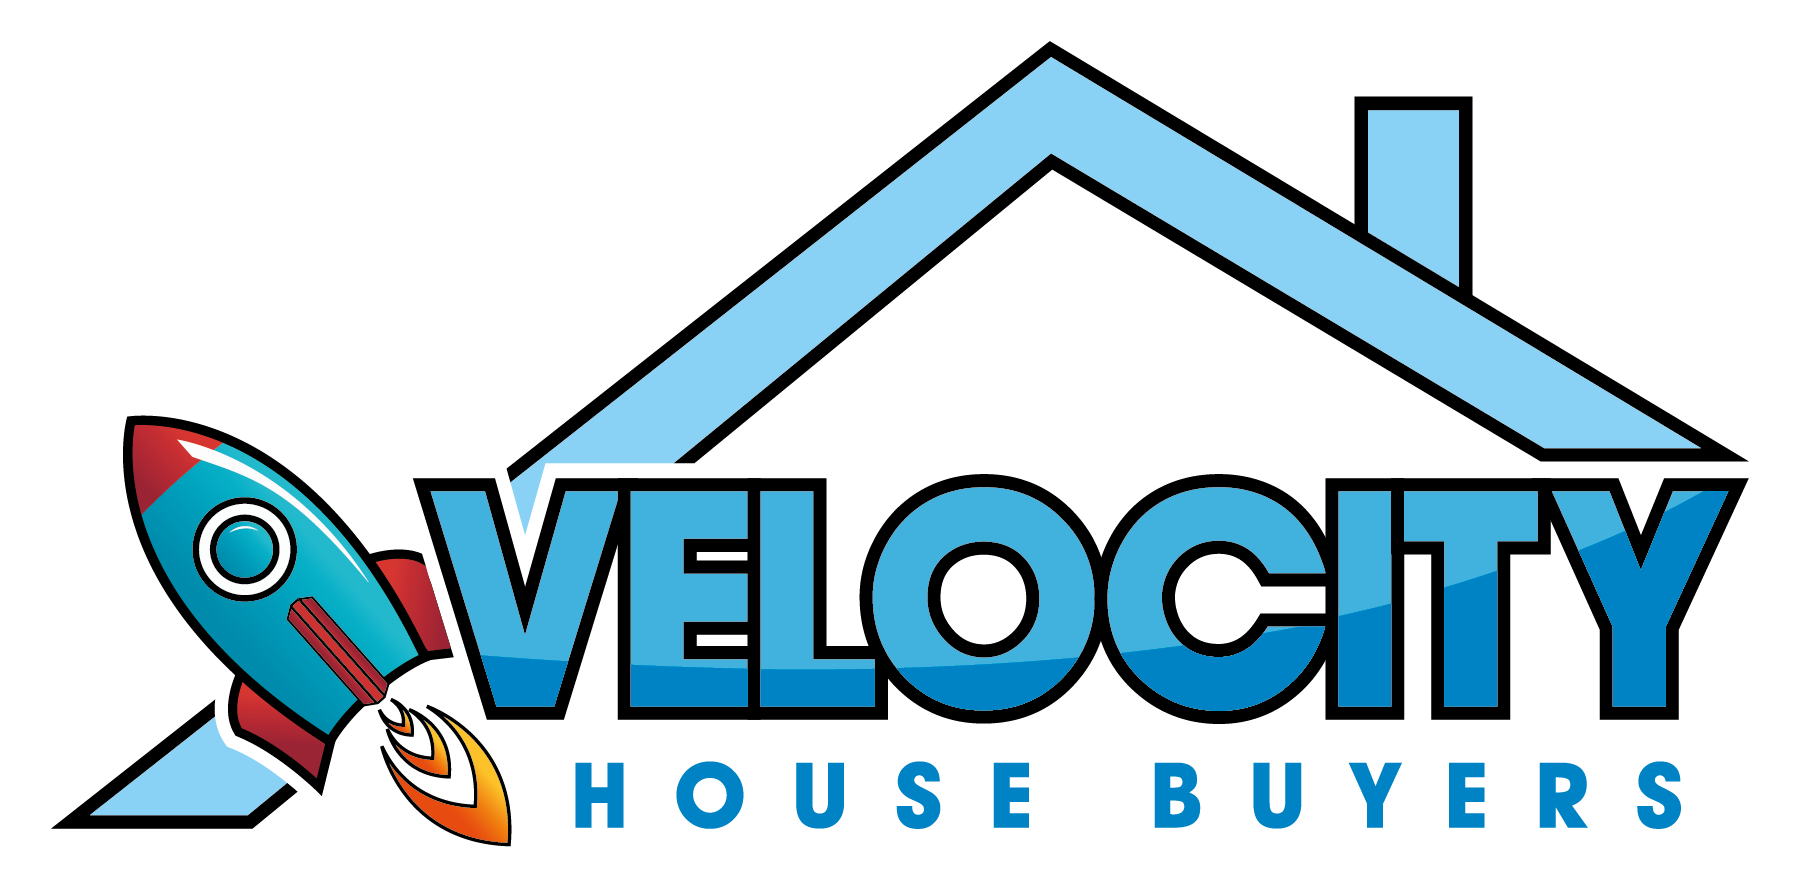 Velocity House Buyers Expands Into All New York Markets Enabling Homeowners To Sell Their Homes Fast and Efficiently